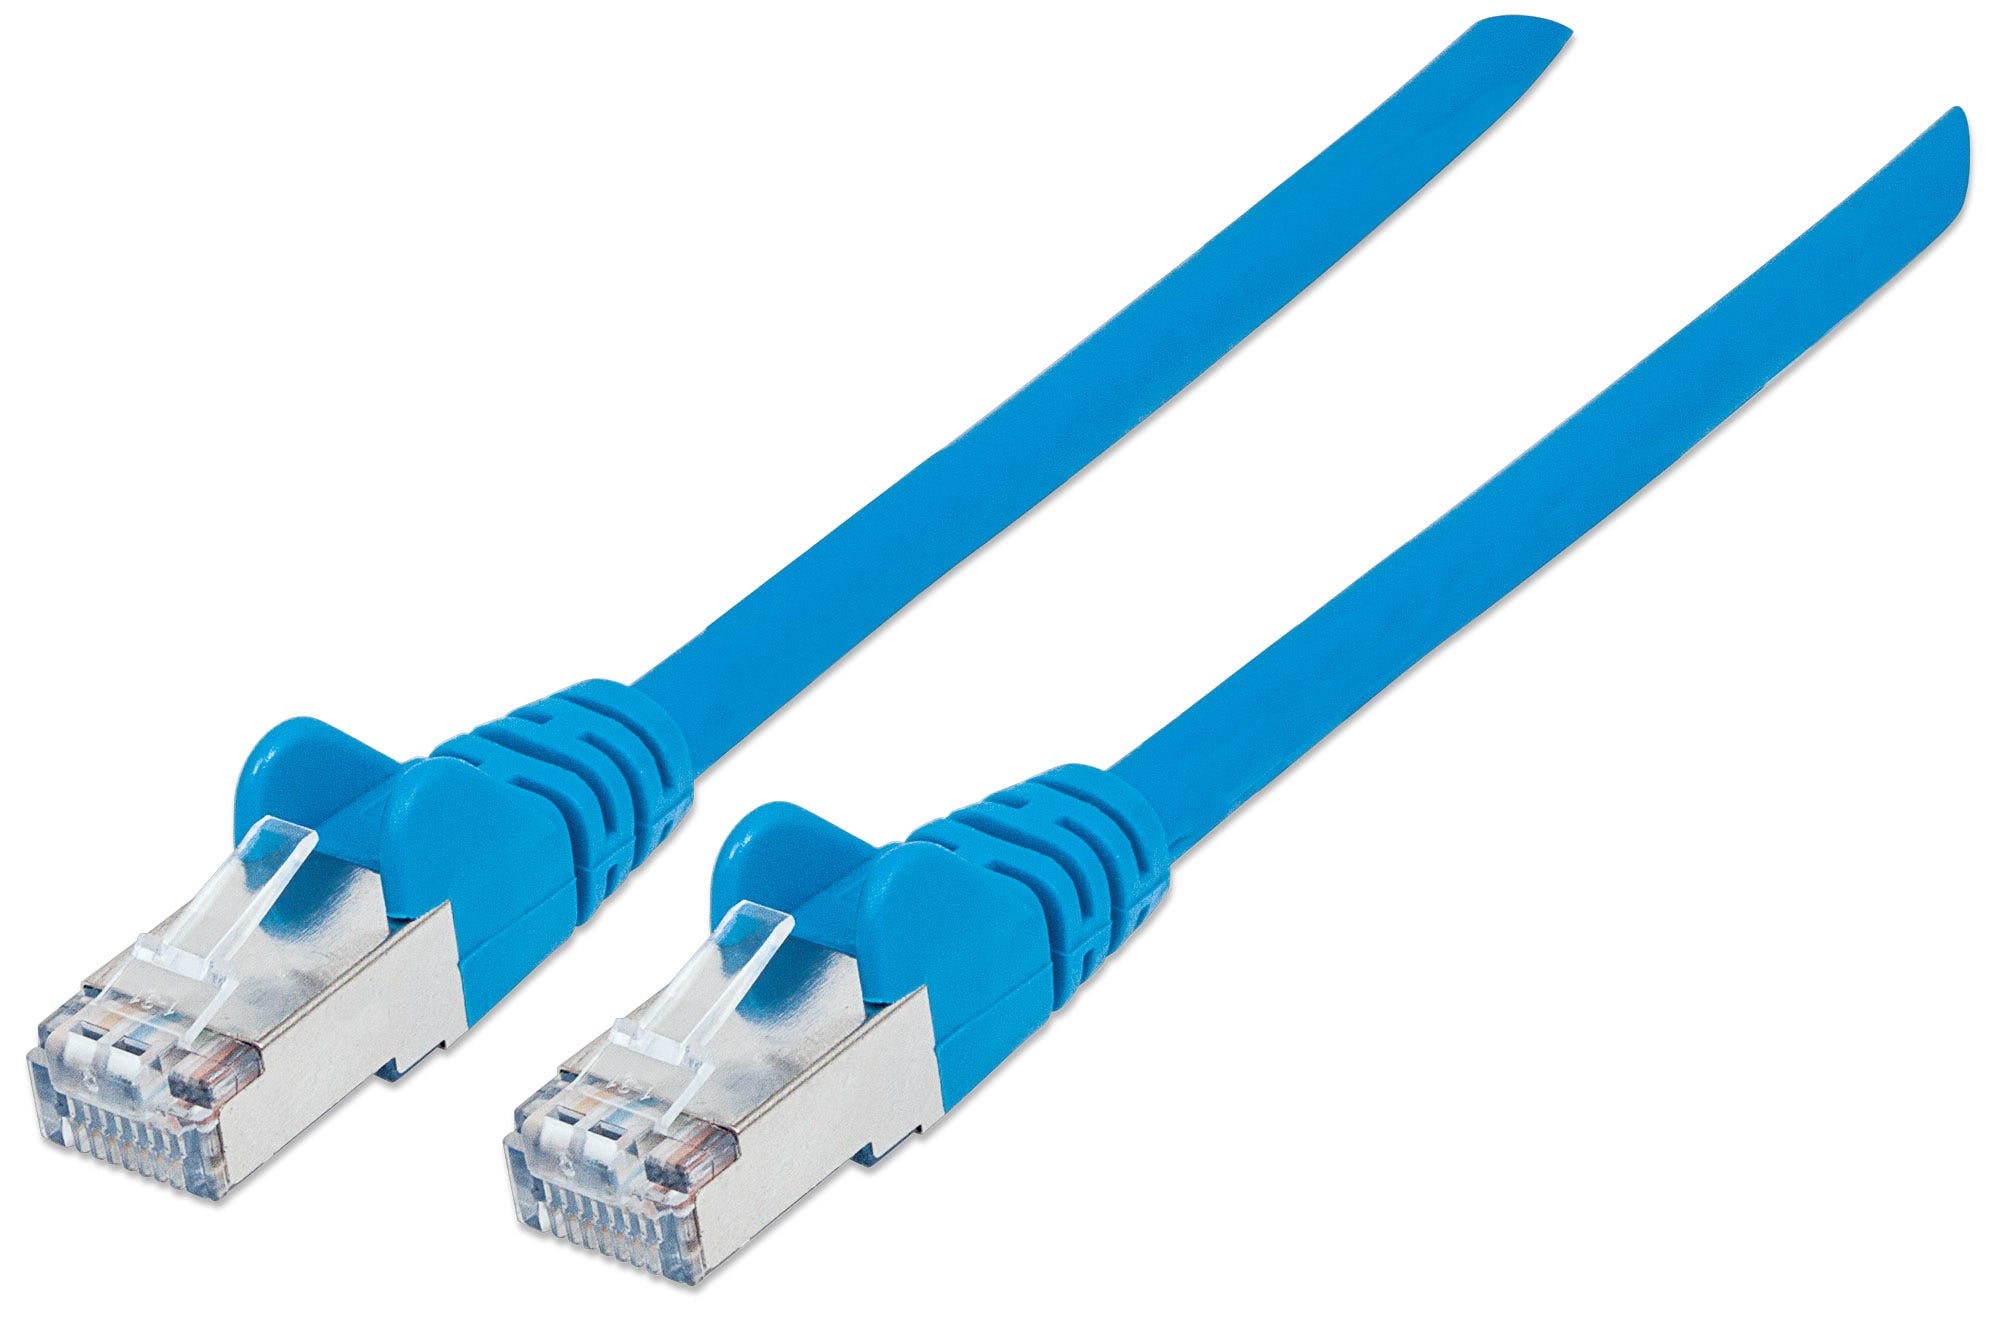 Intellinet Network Patch Cable, Cat6A, 2m, Blue, Copper, S/FTP, LSOH / LSZH, PVC, RJ45, Gold Plated Contacts, Snagless, Booted, Lifetime Warranty, Polybag